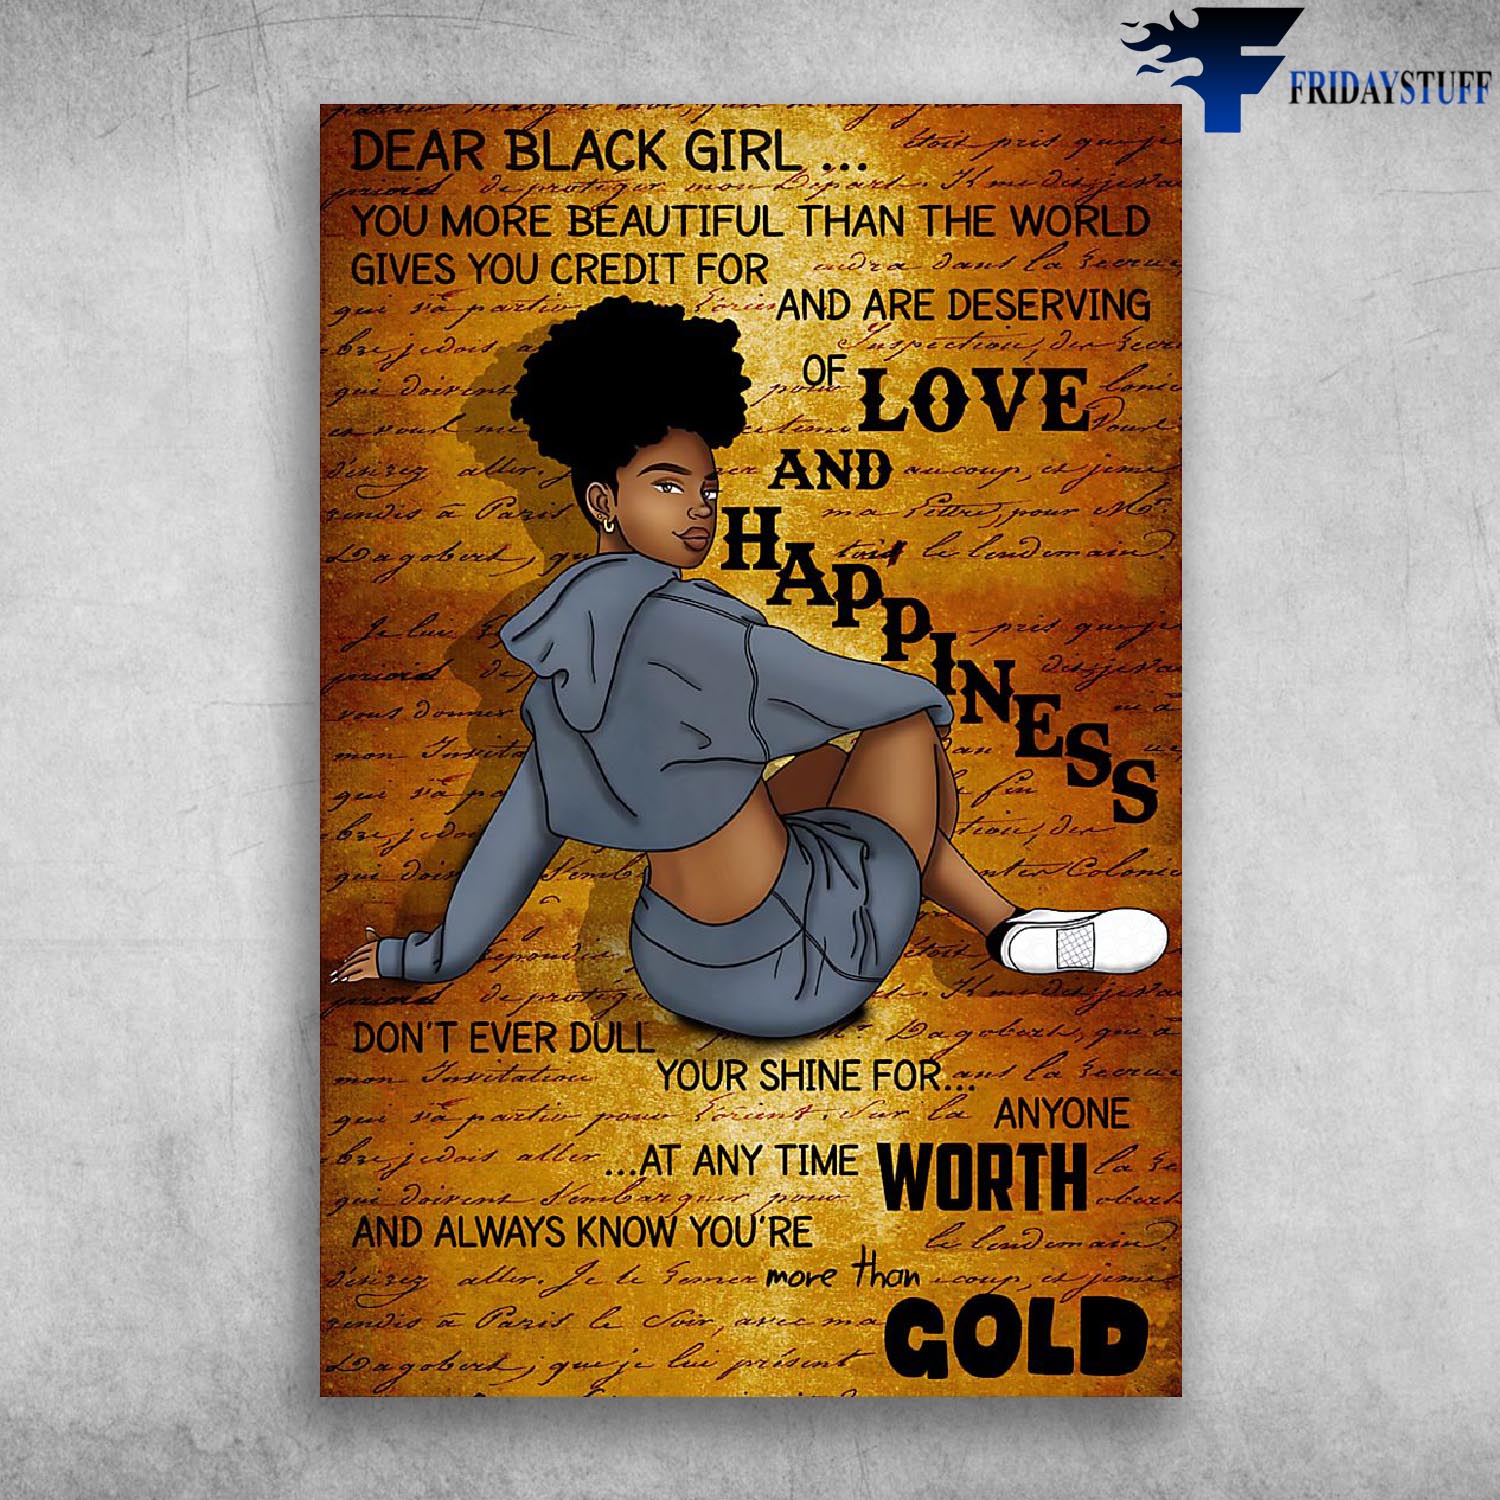 Dear Black Girl You More Beautiful Than The World Gives You Credit For Are Deserving Of Love